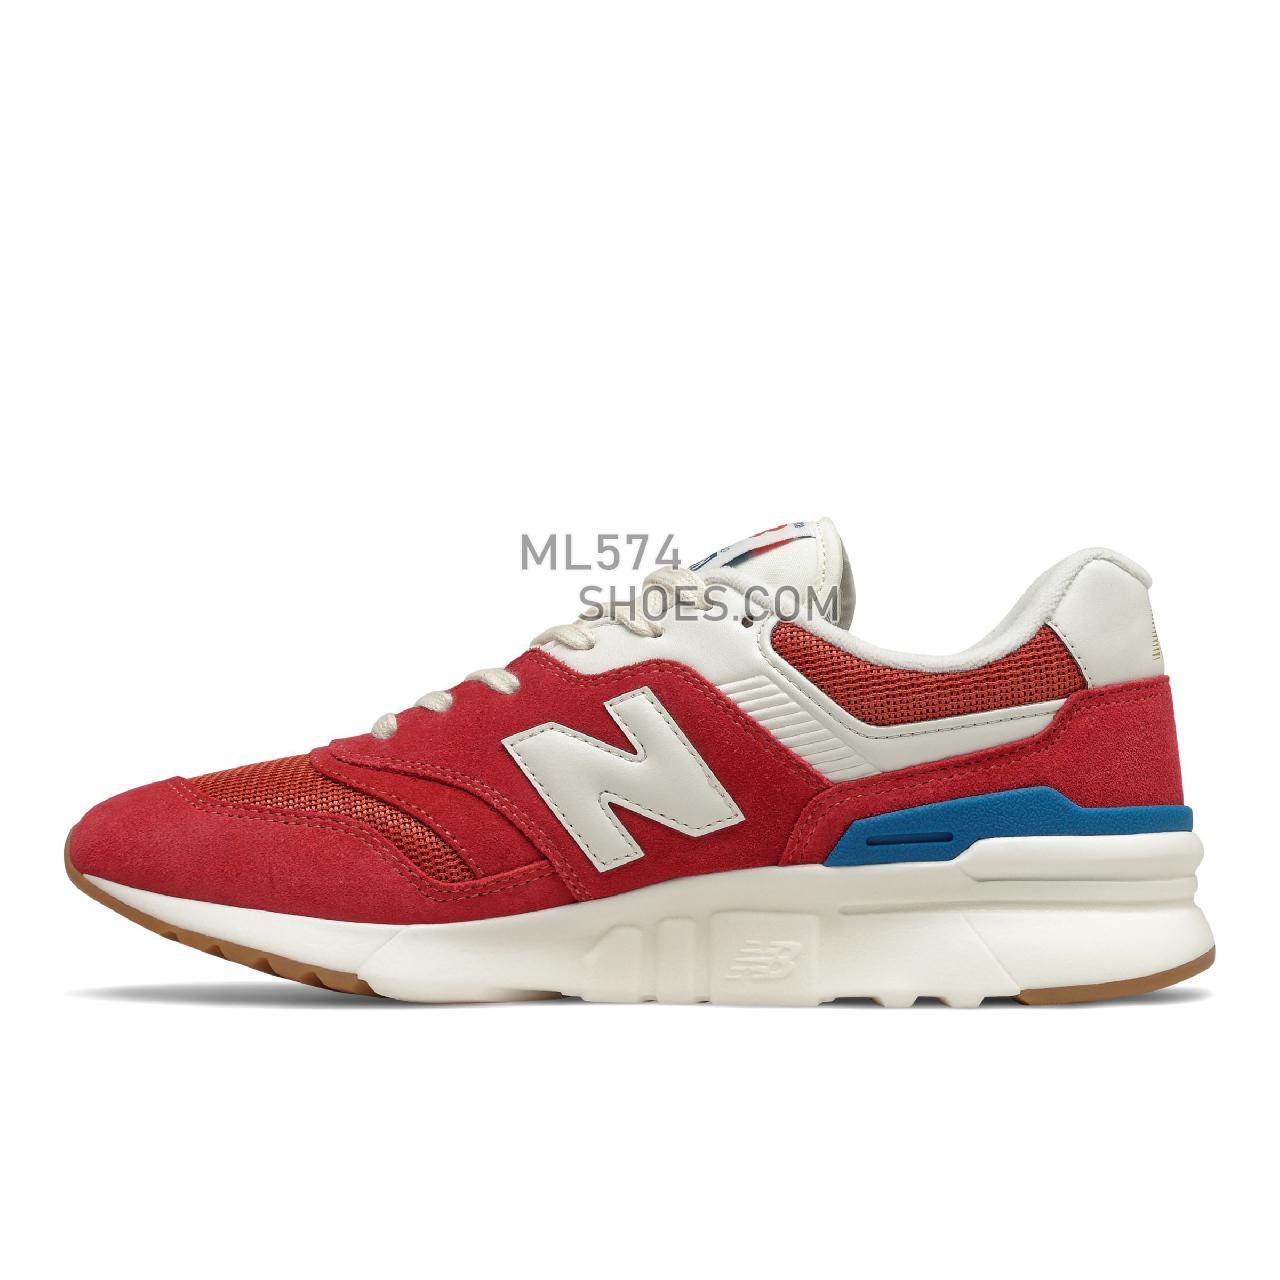 New Balance 997H - Men's Classic Sneakers - Team Red with Varsity Gold - CM997HRG